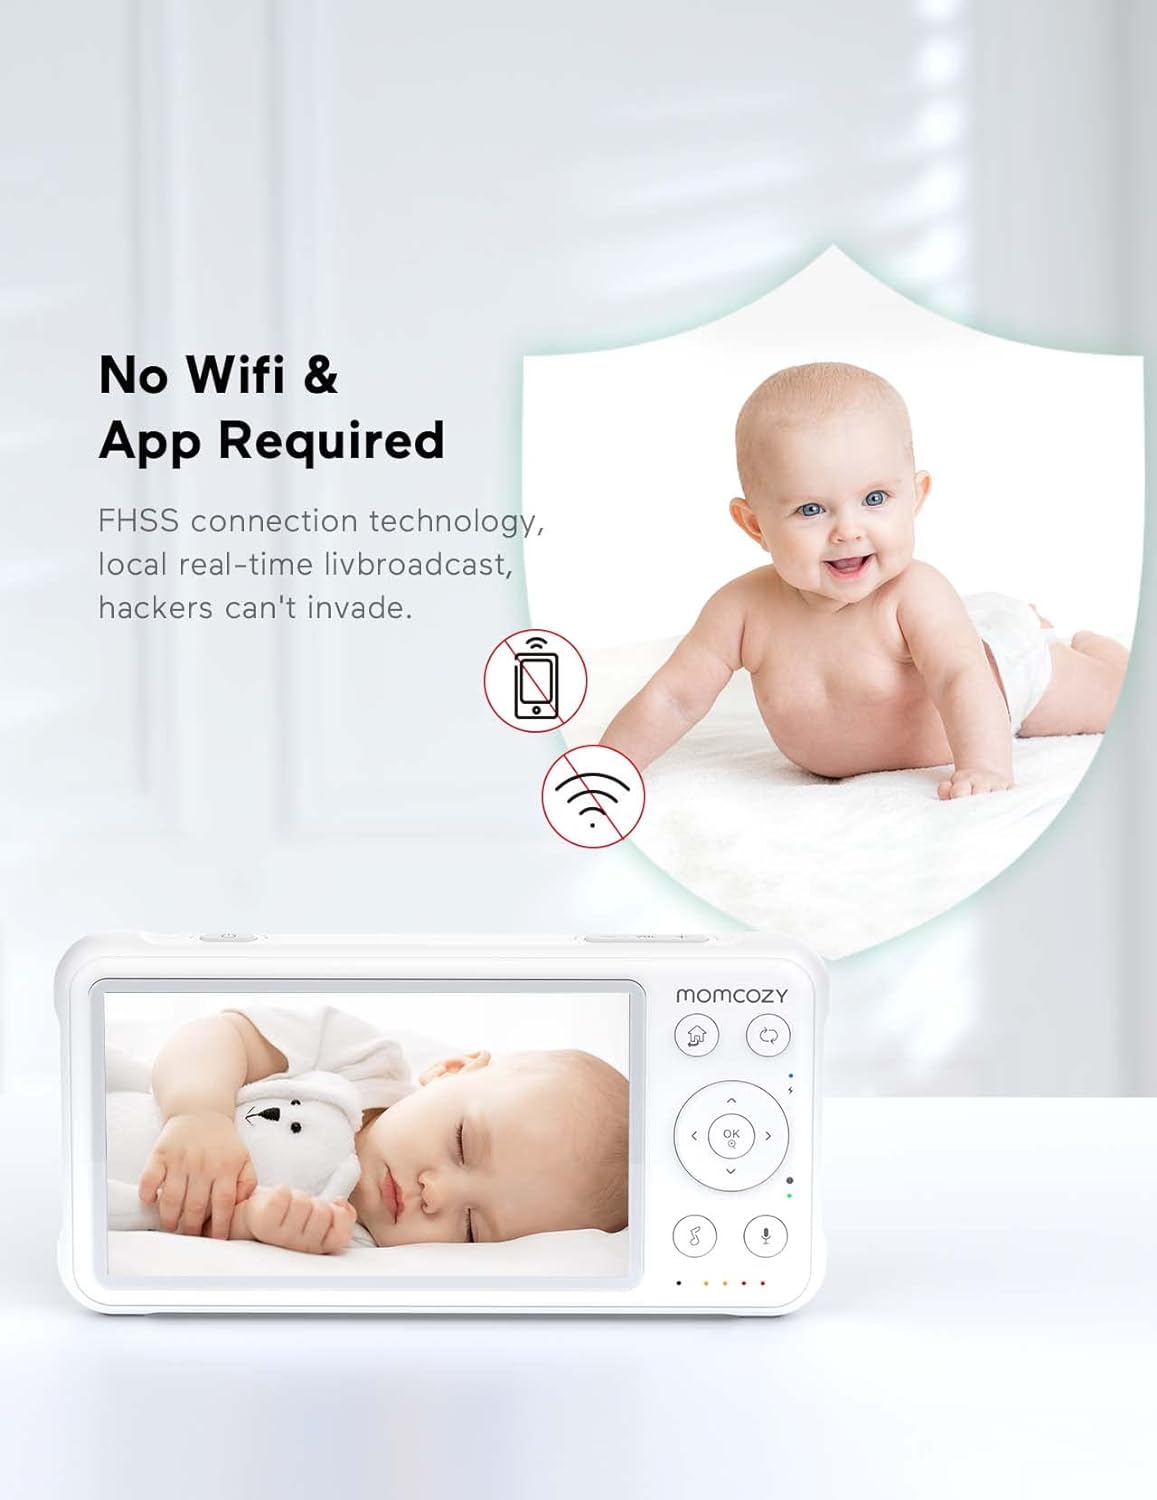 Video Baby Monitor with Camera and Audio 5" 1080P Display 5000mAh Battery Baby Camera Monitor No WiFi Remote Pan-Tilt-Zoom, Infrared Night Vision, 2-Way Talk and Lullaby Player